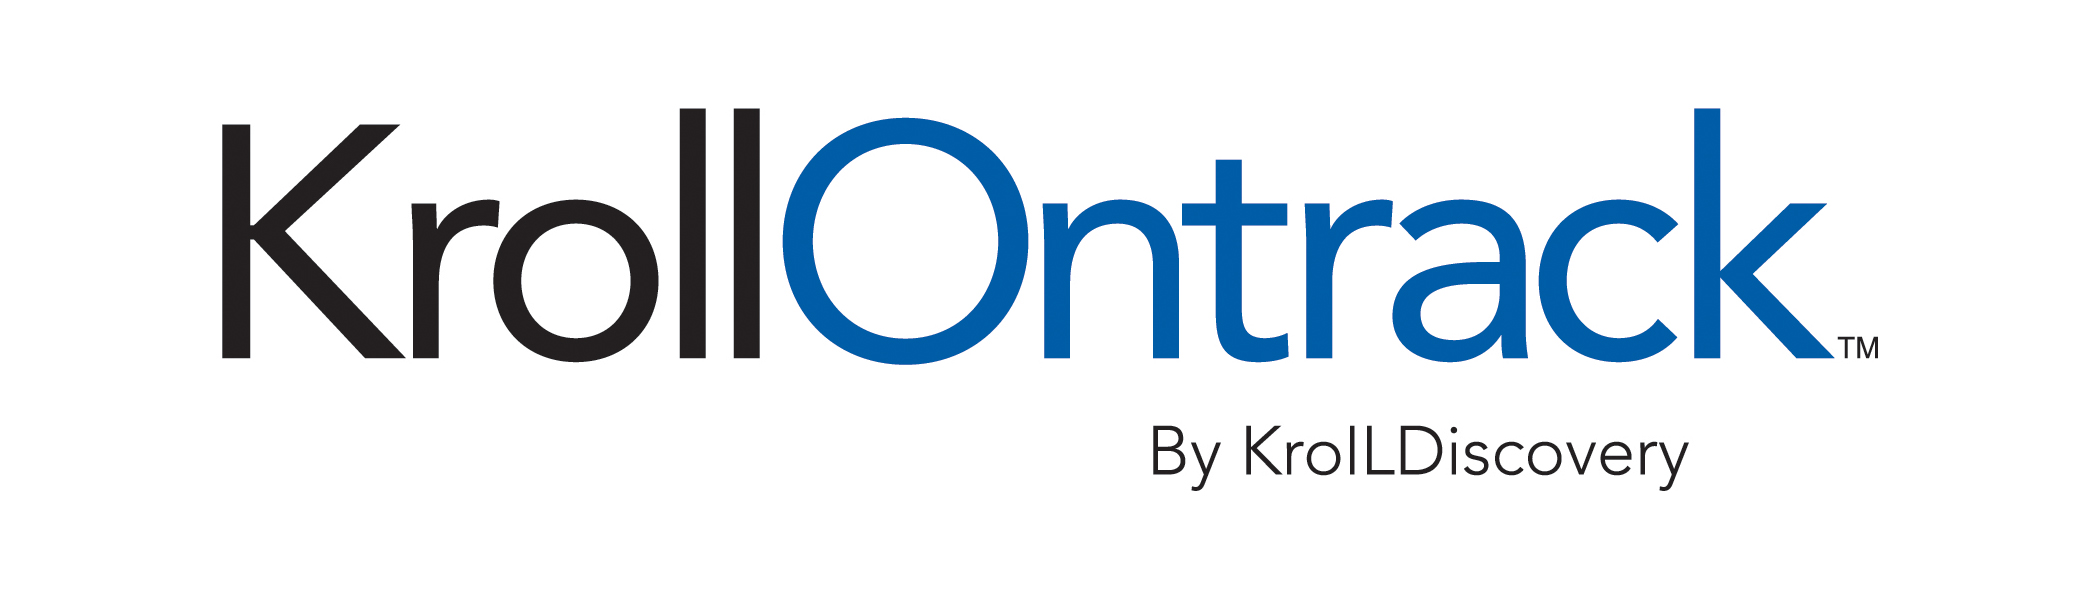 Kroll Ontrack provides technology-enabled services and software to help law firms, corporations, government agencies and consumers solve complex data challenges.